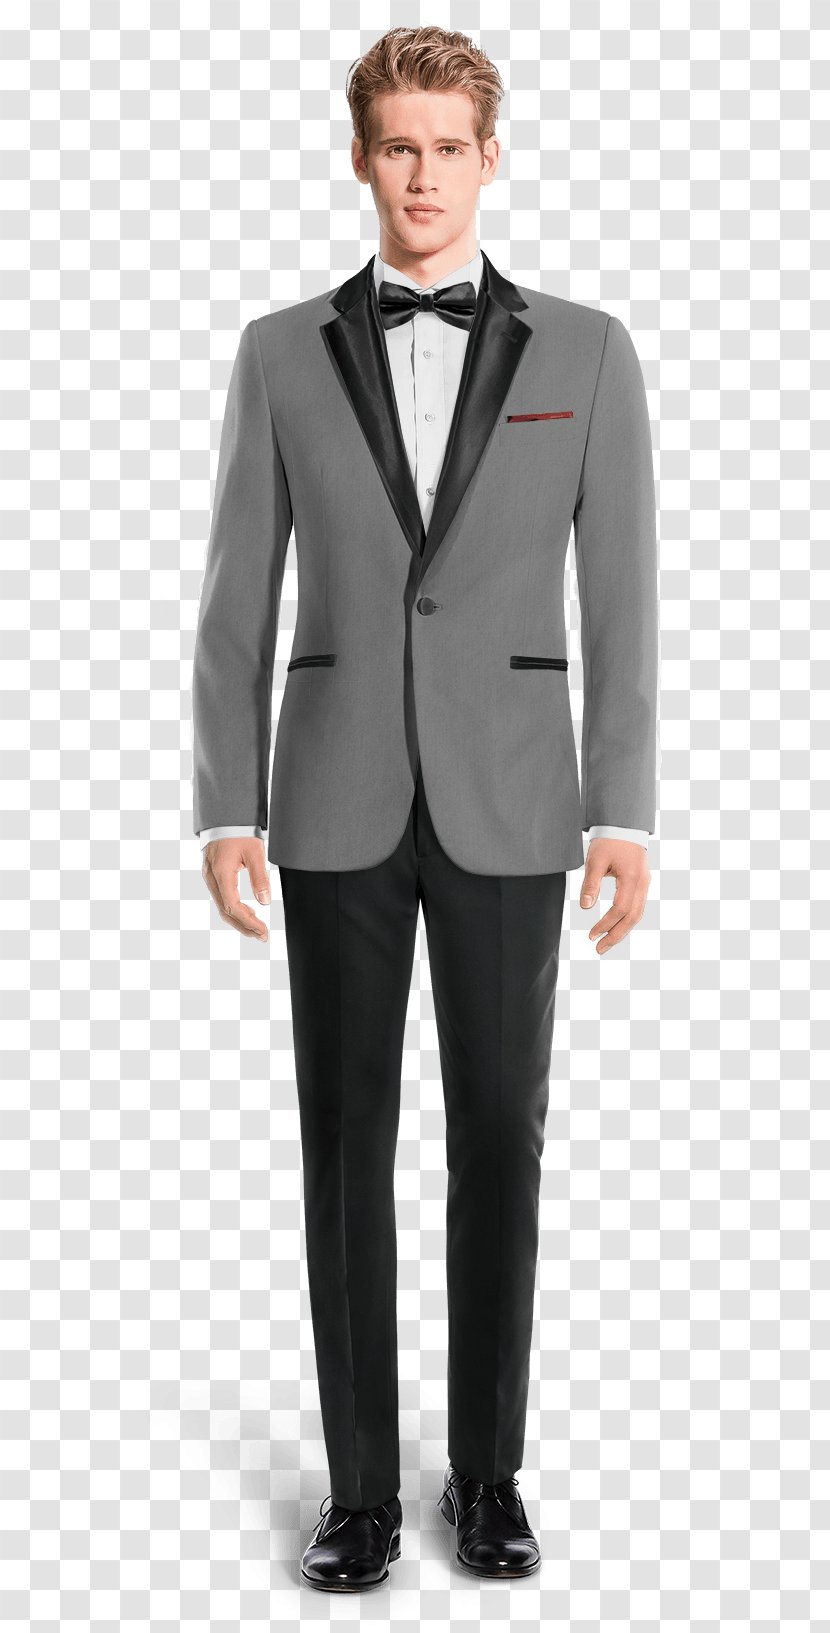 Suit Pants Tweed Double-breasted Tuxedo - Jacket - Smoking Man Transparent PNG